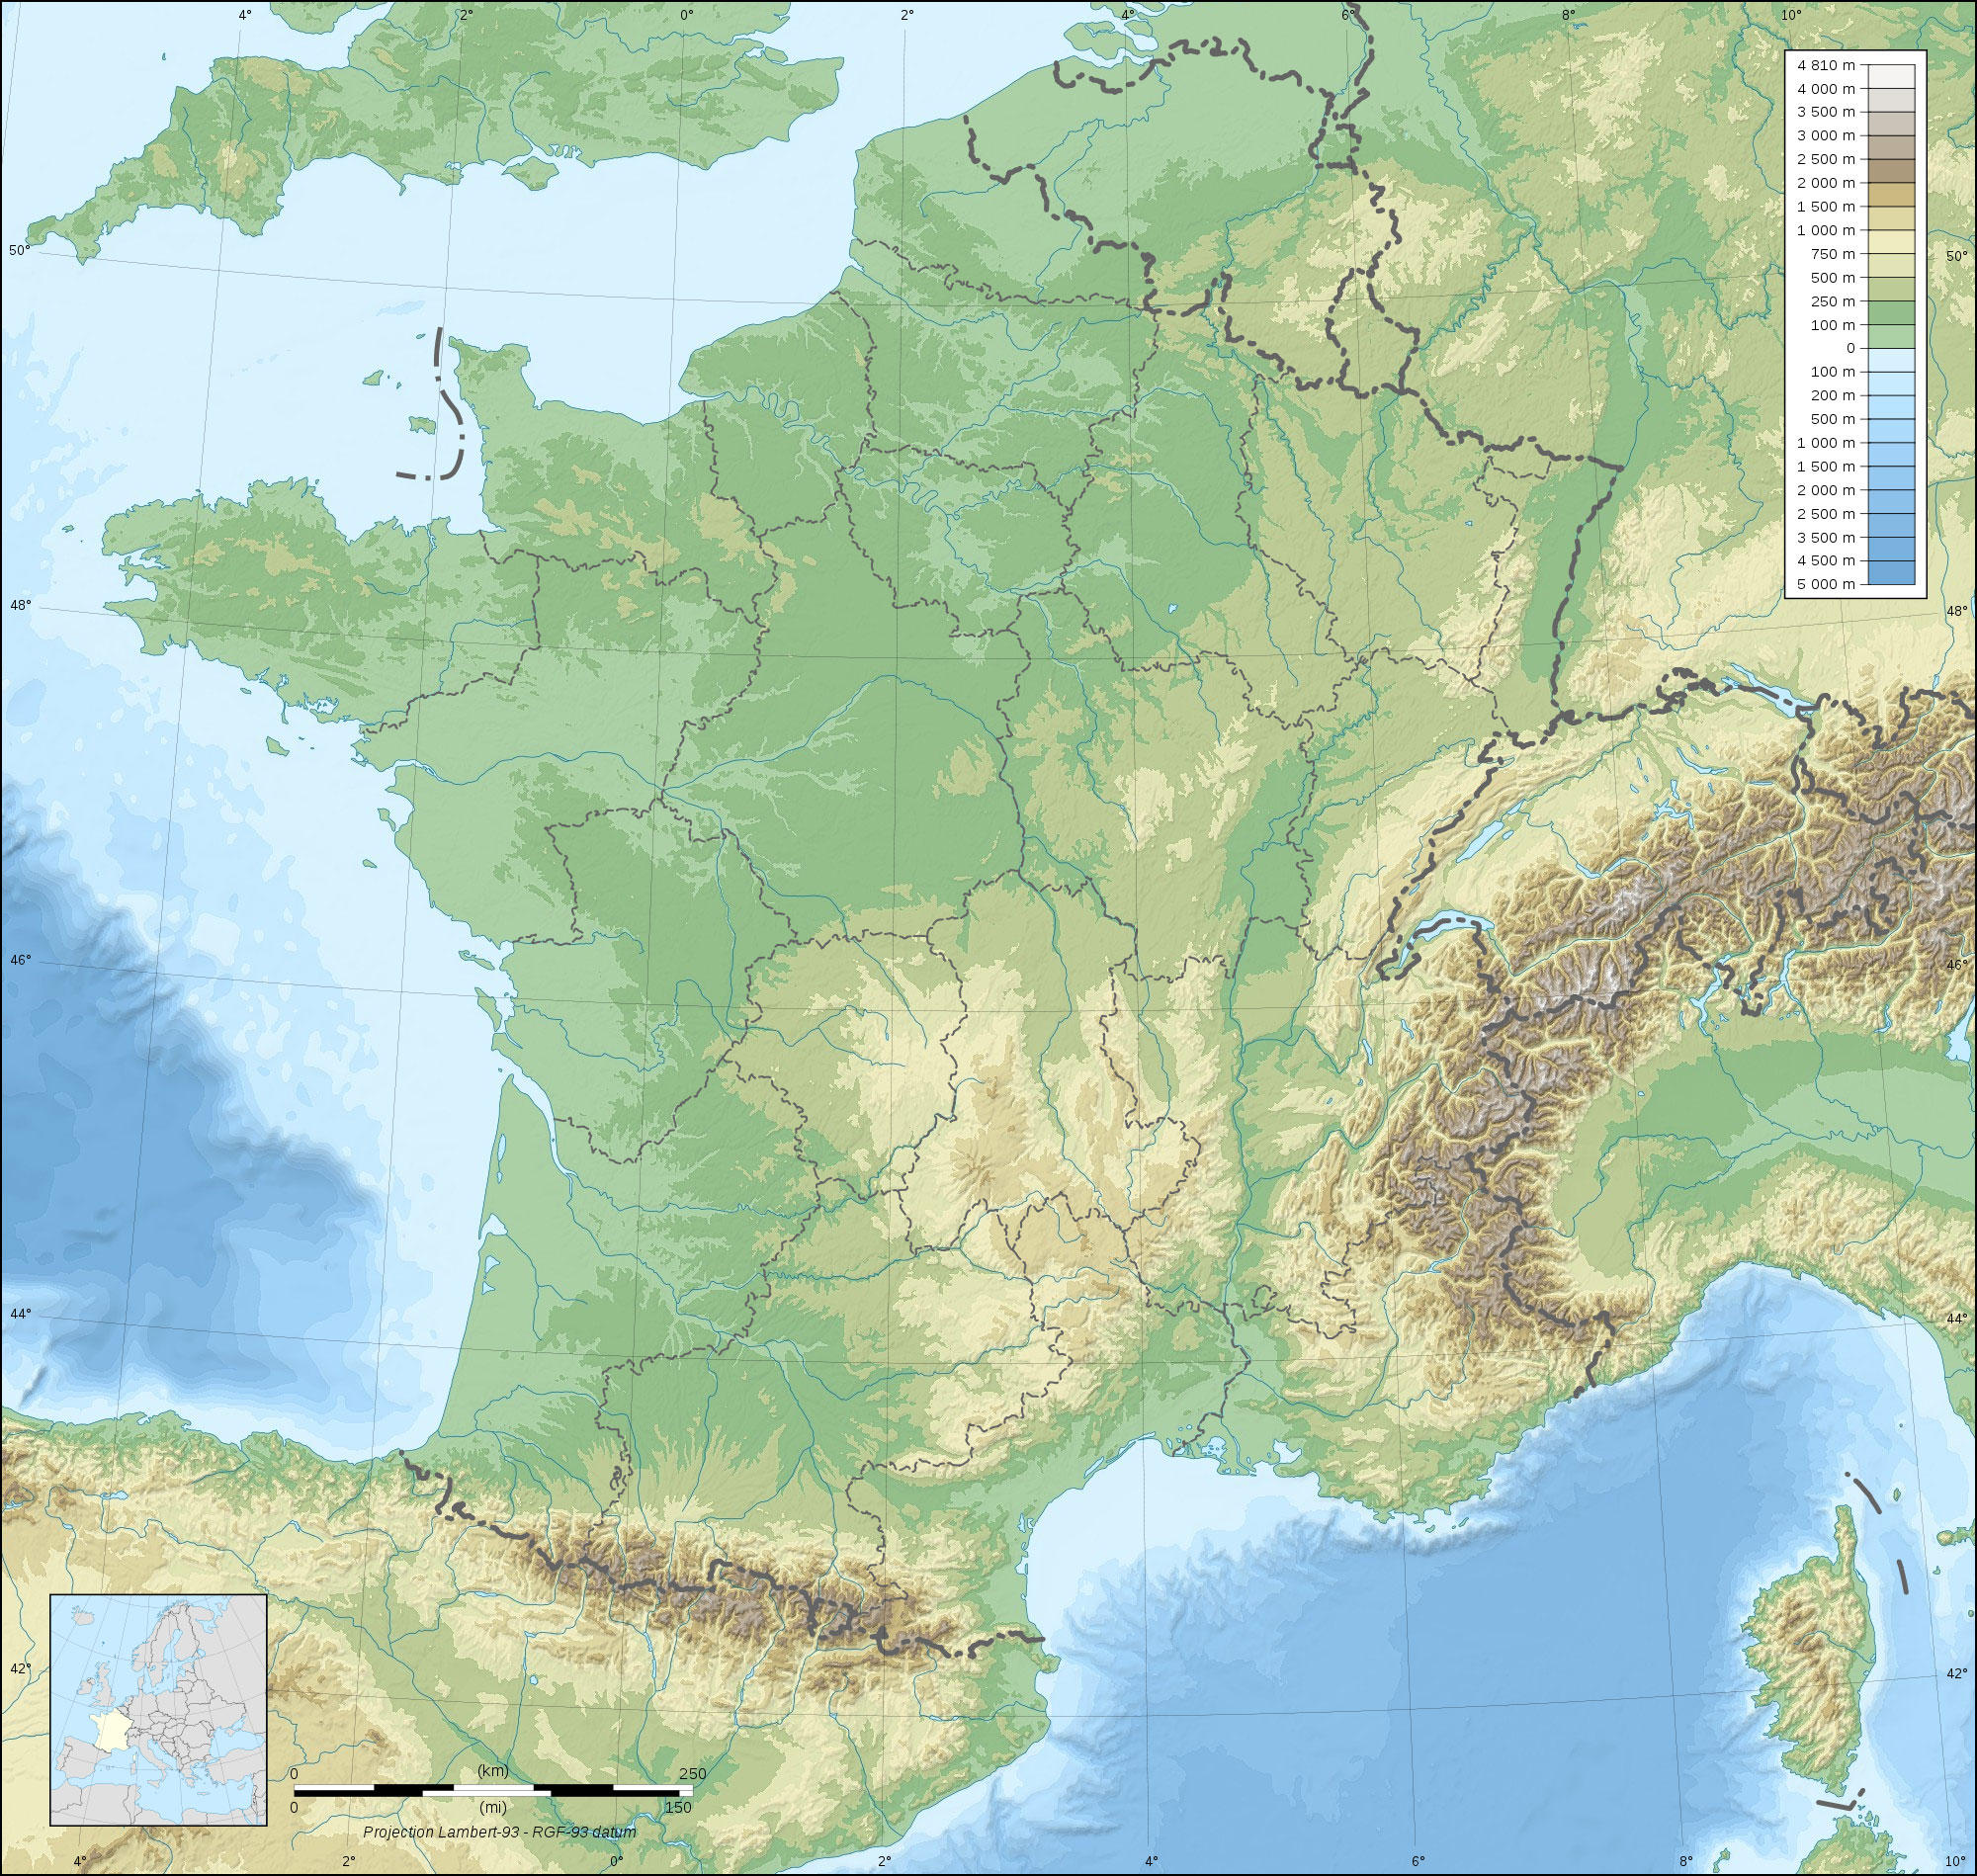 Image Topography of France